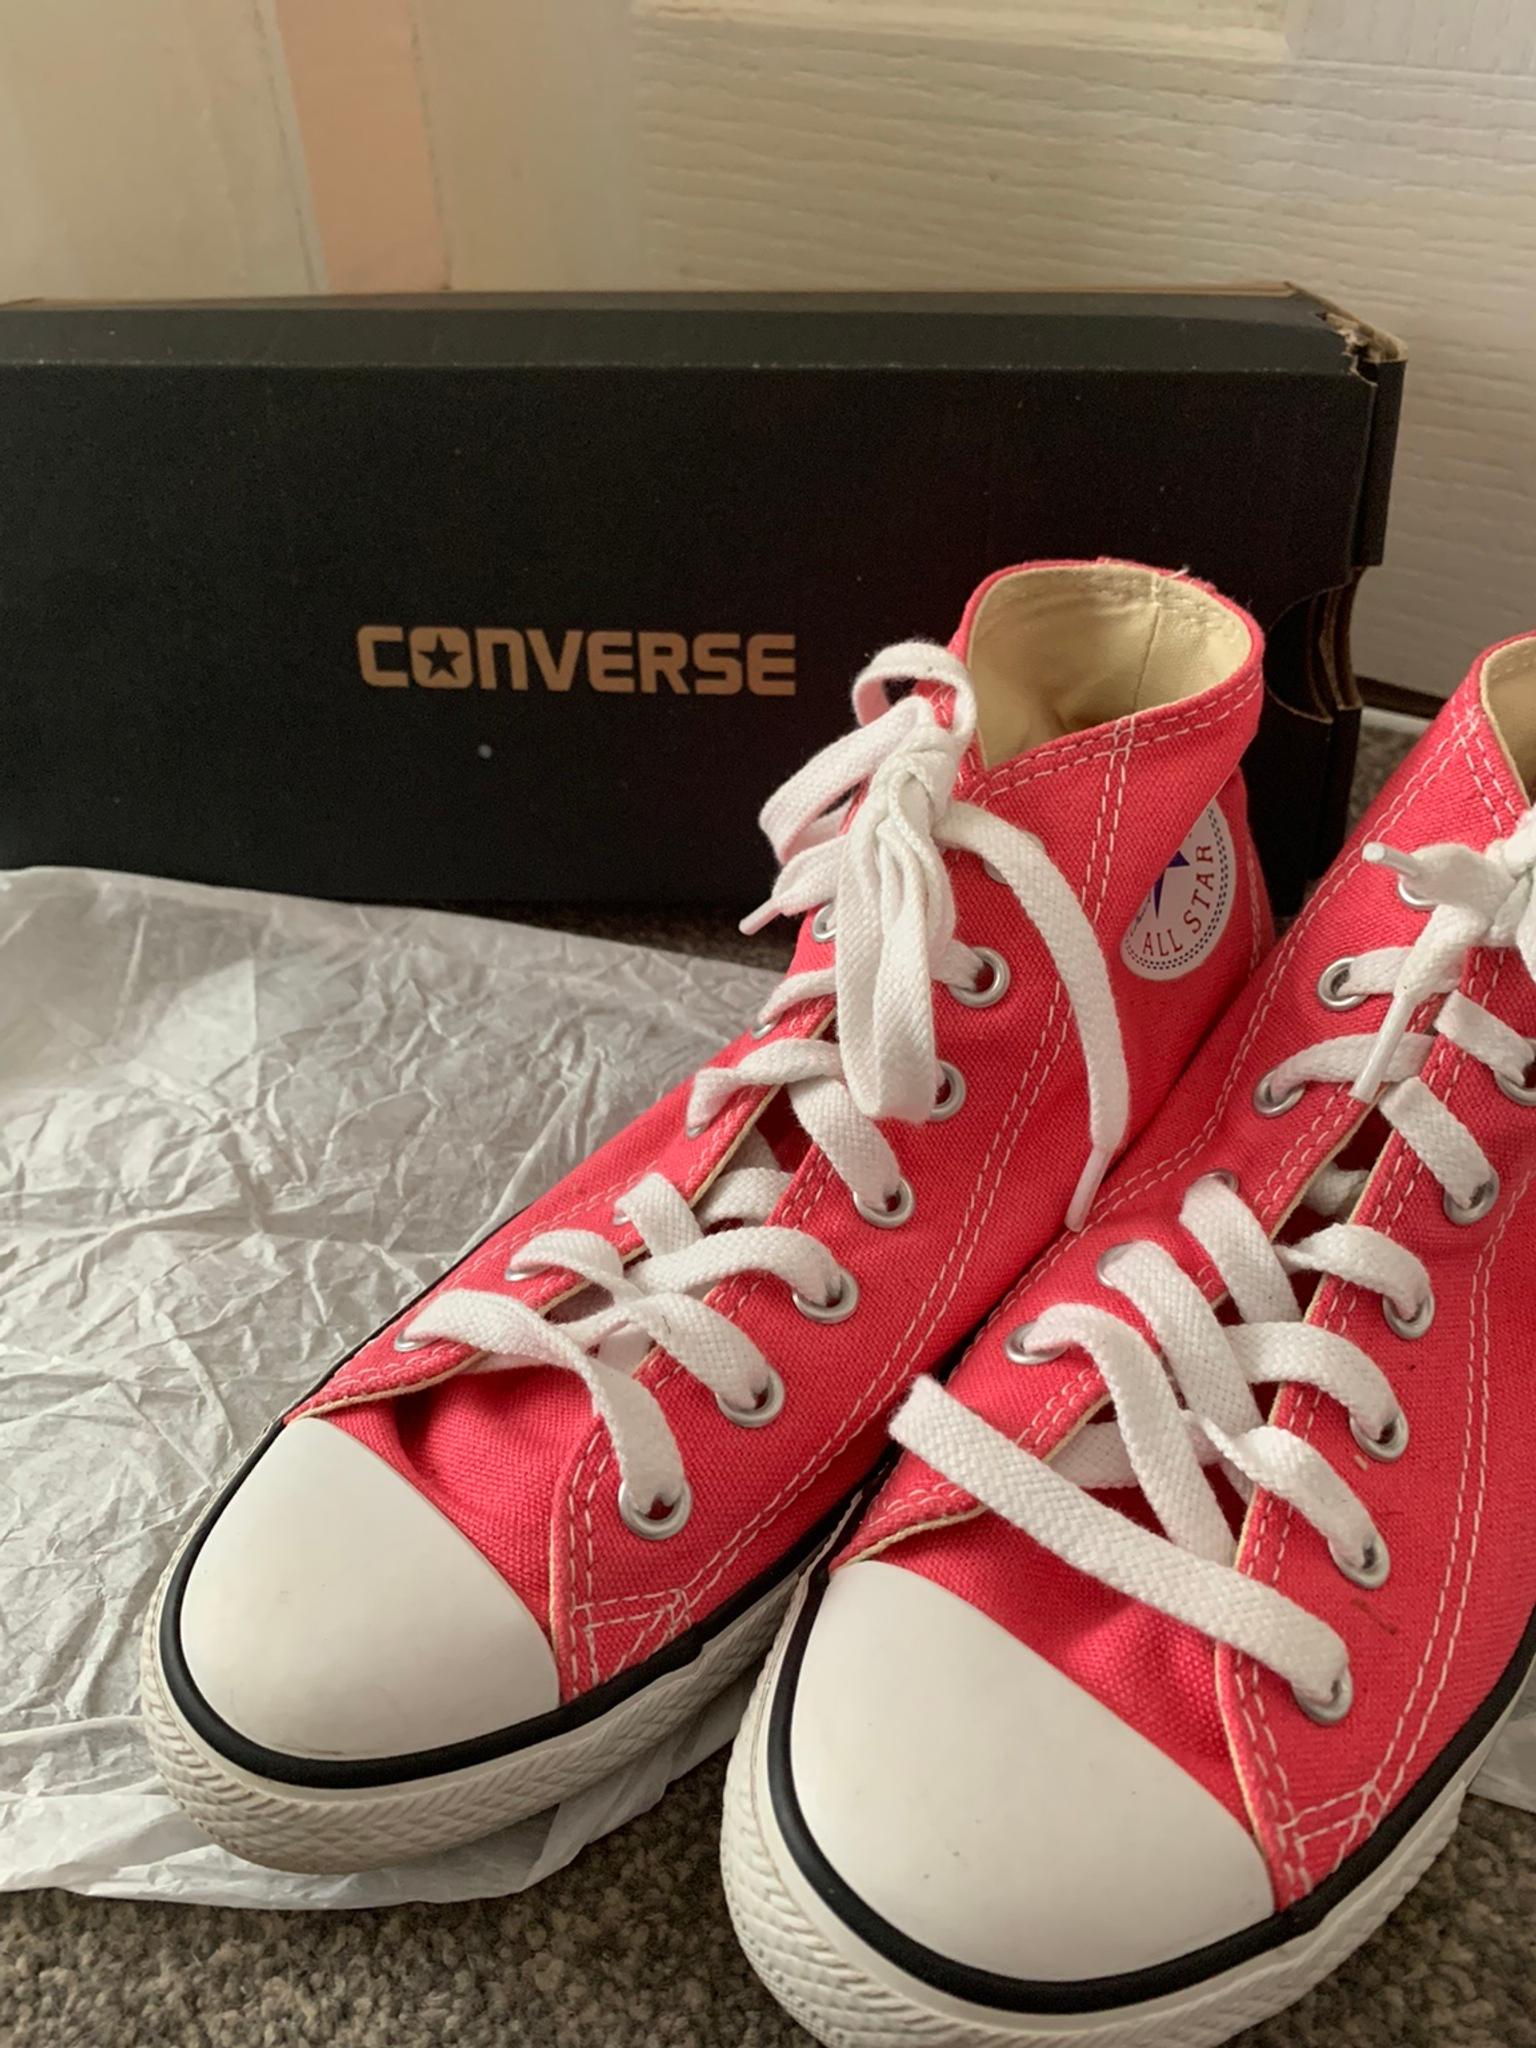 converse high tops size 4